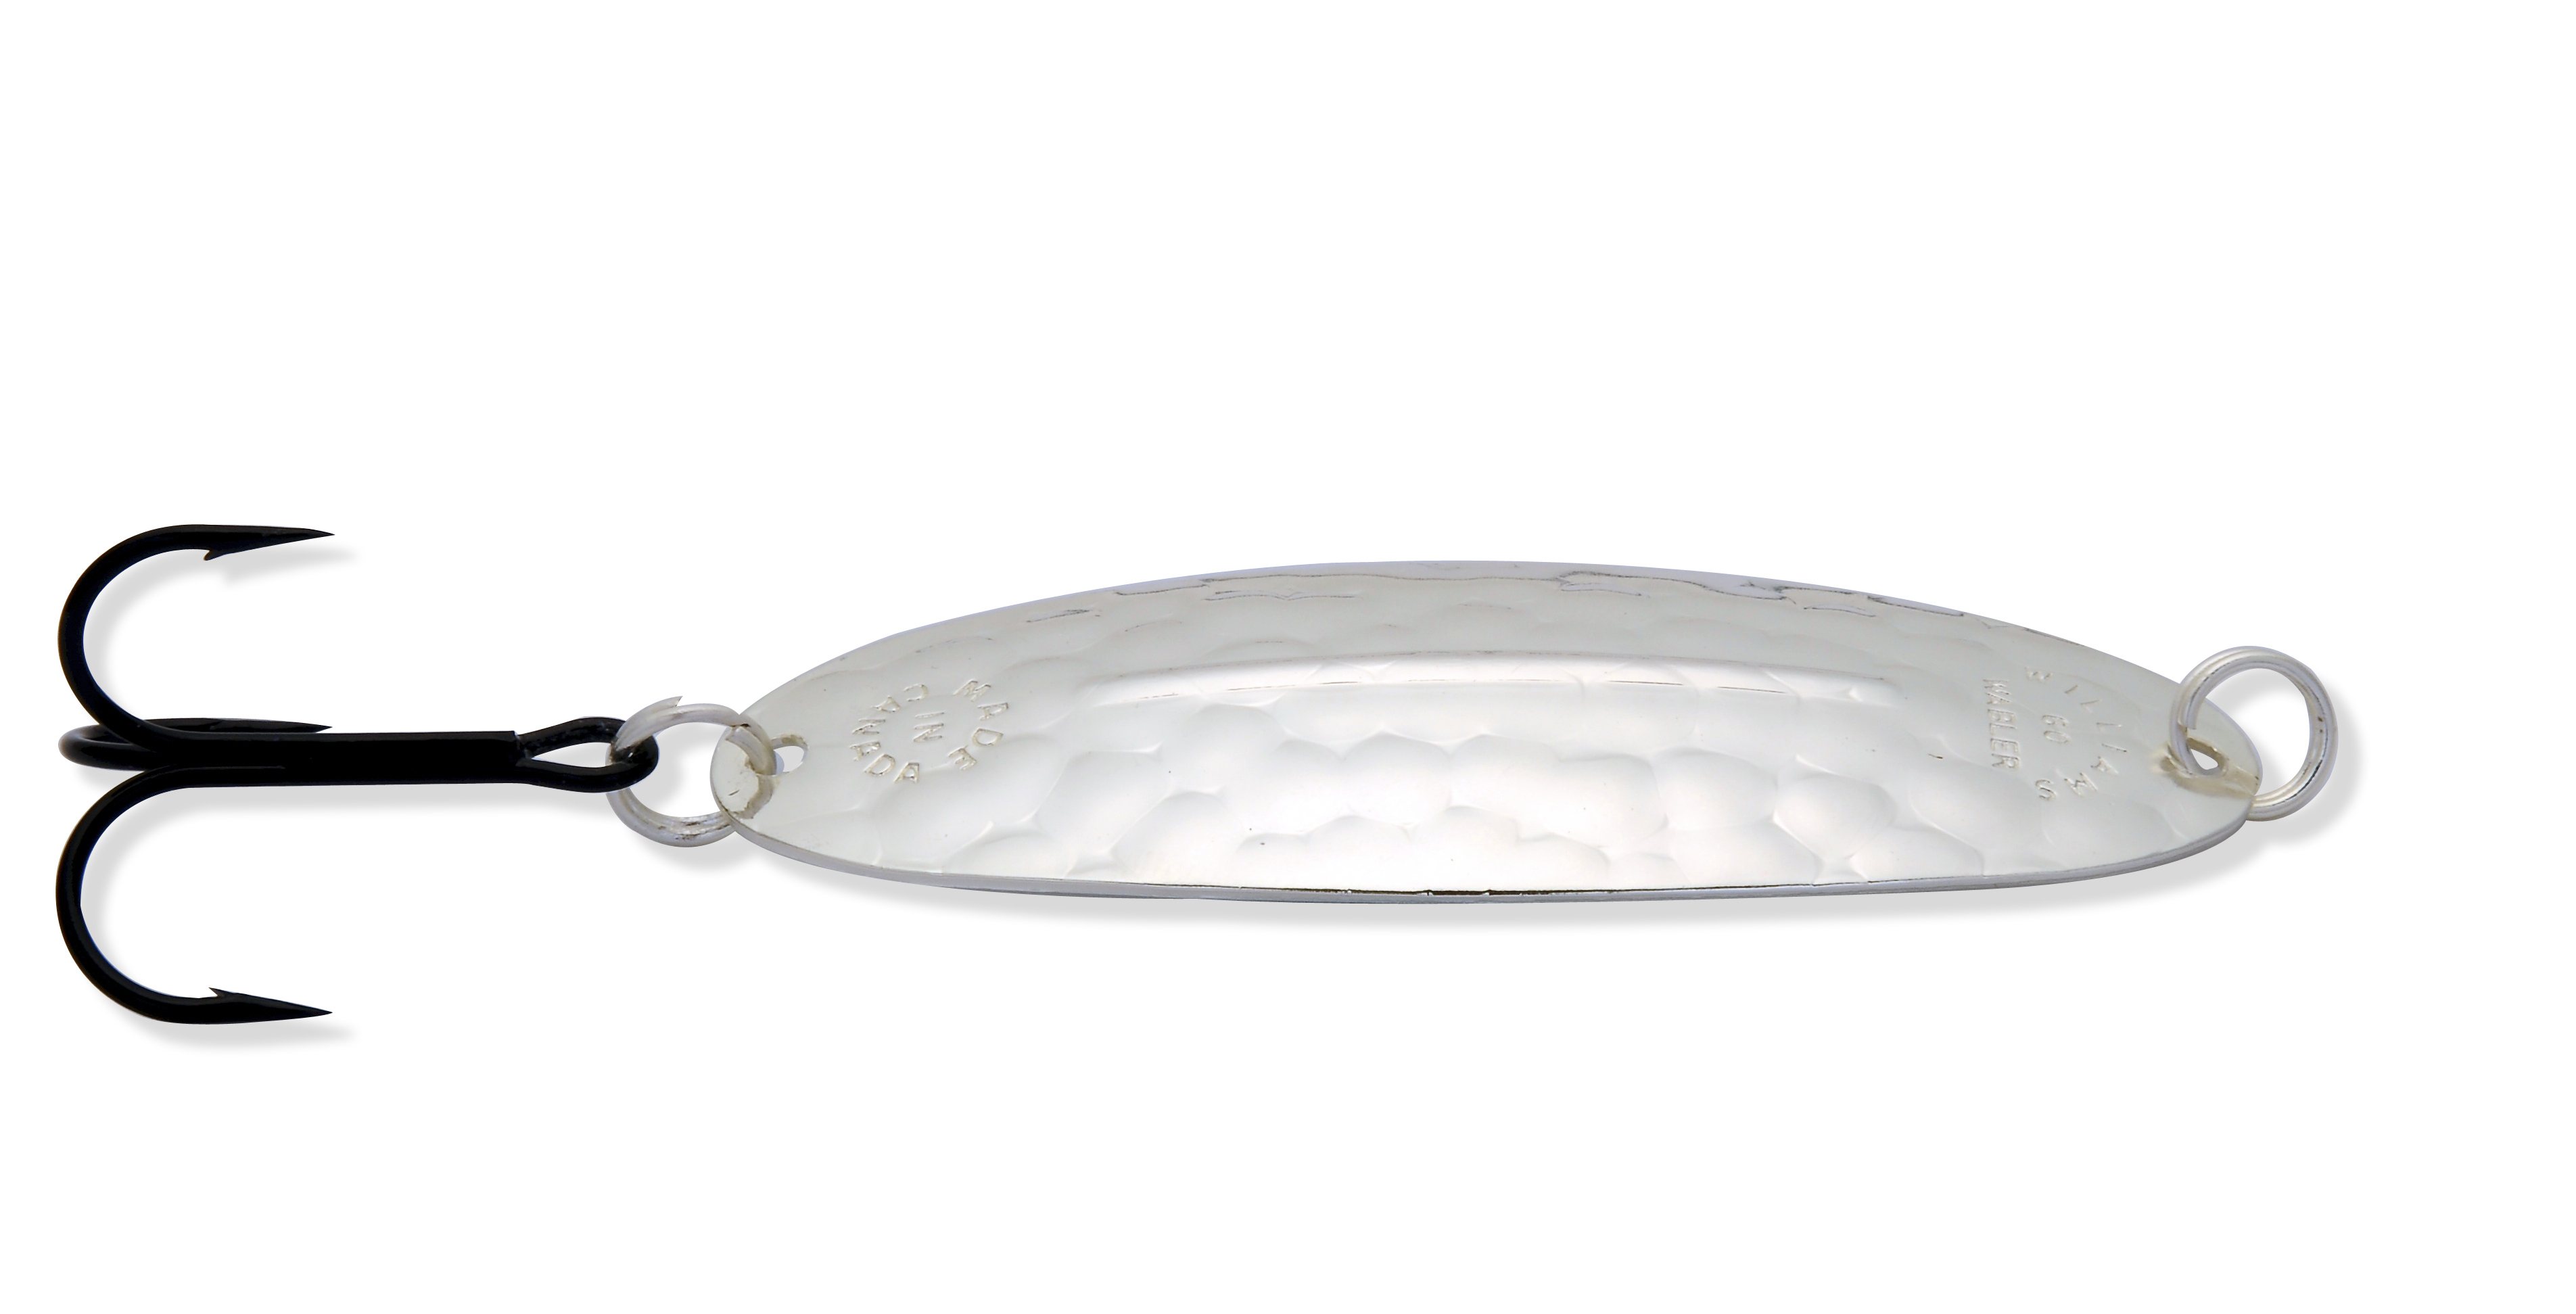 WILLIAMS LARGE WABLER SPOON 8,3 CM 21,3 G - Spoons